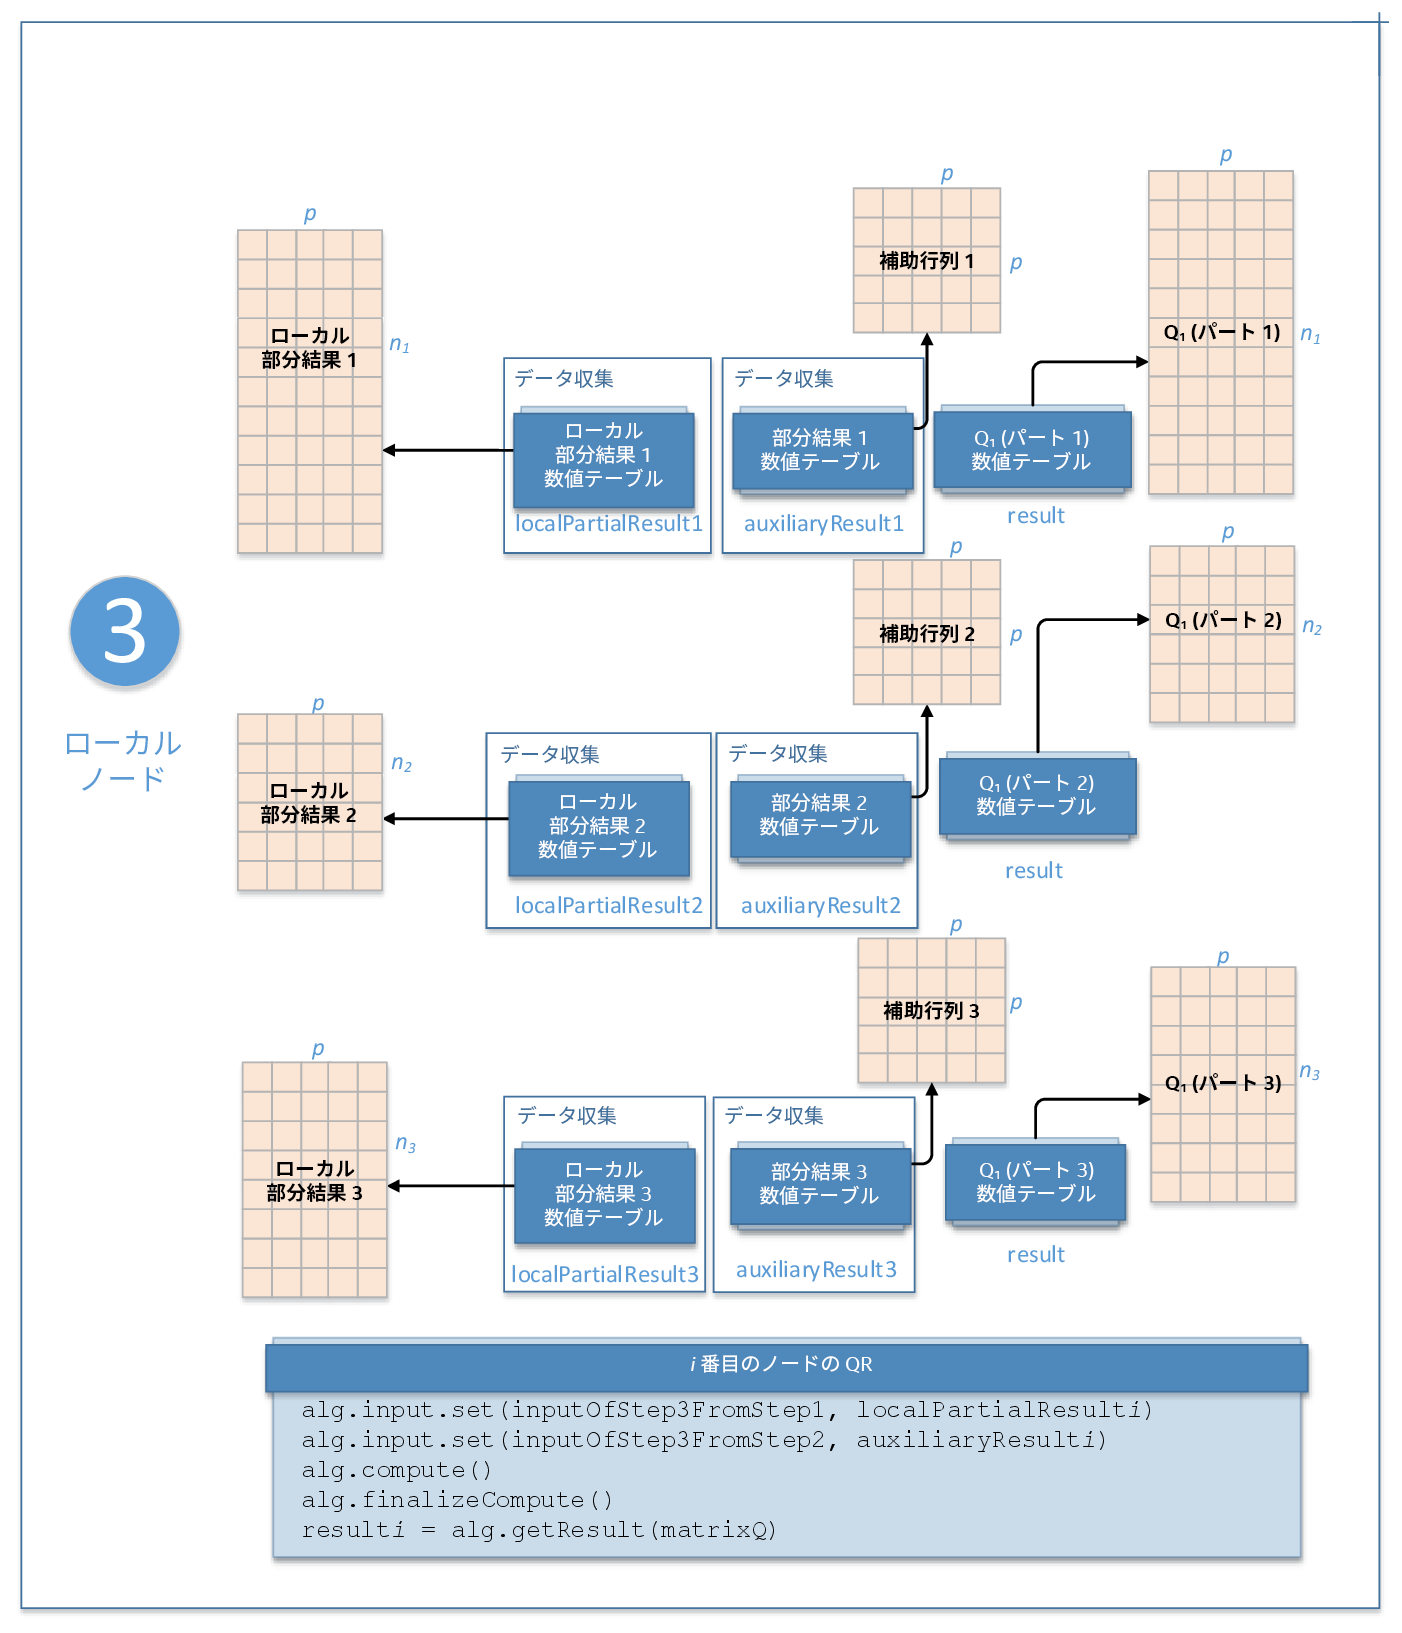 QR Decomposition Distributed Processing Workflow Step 3